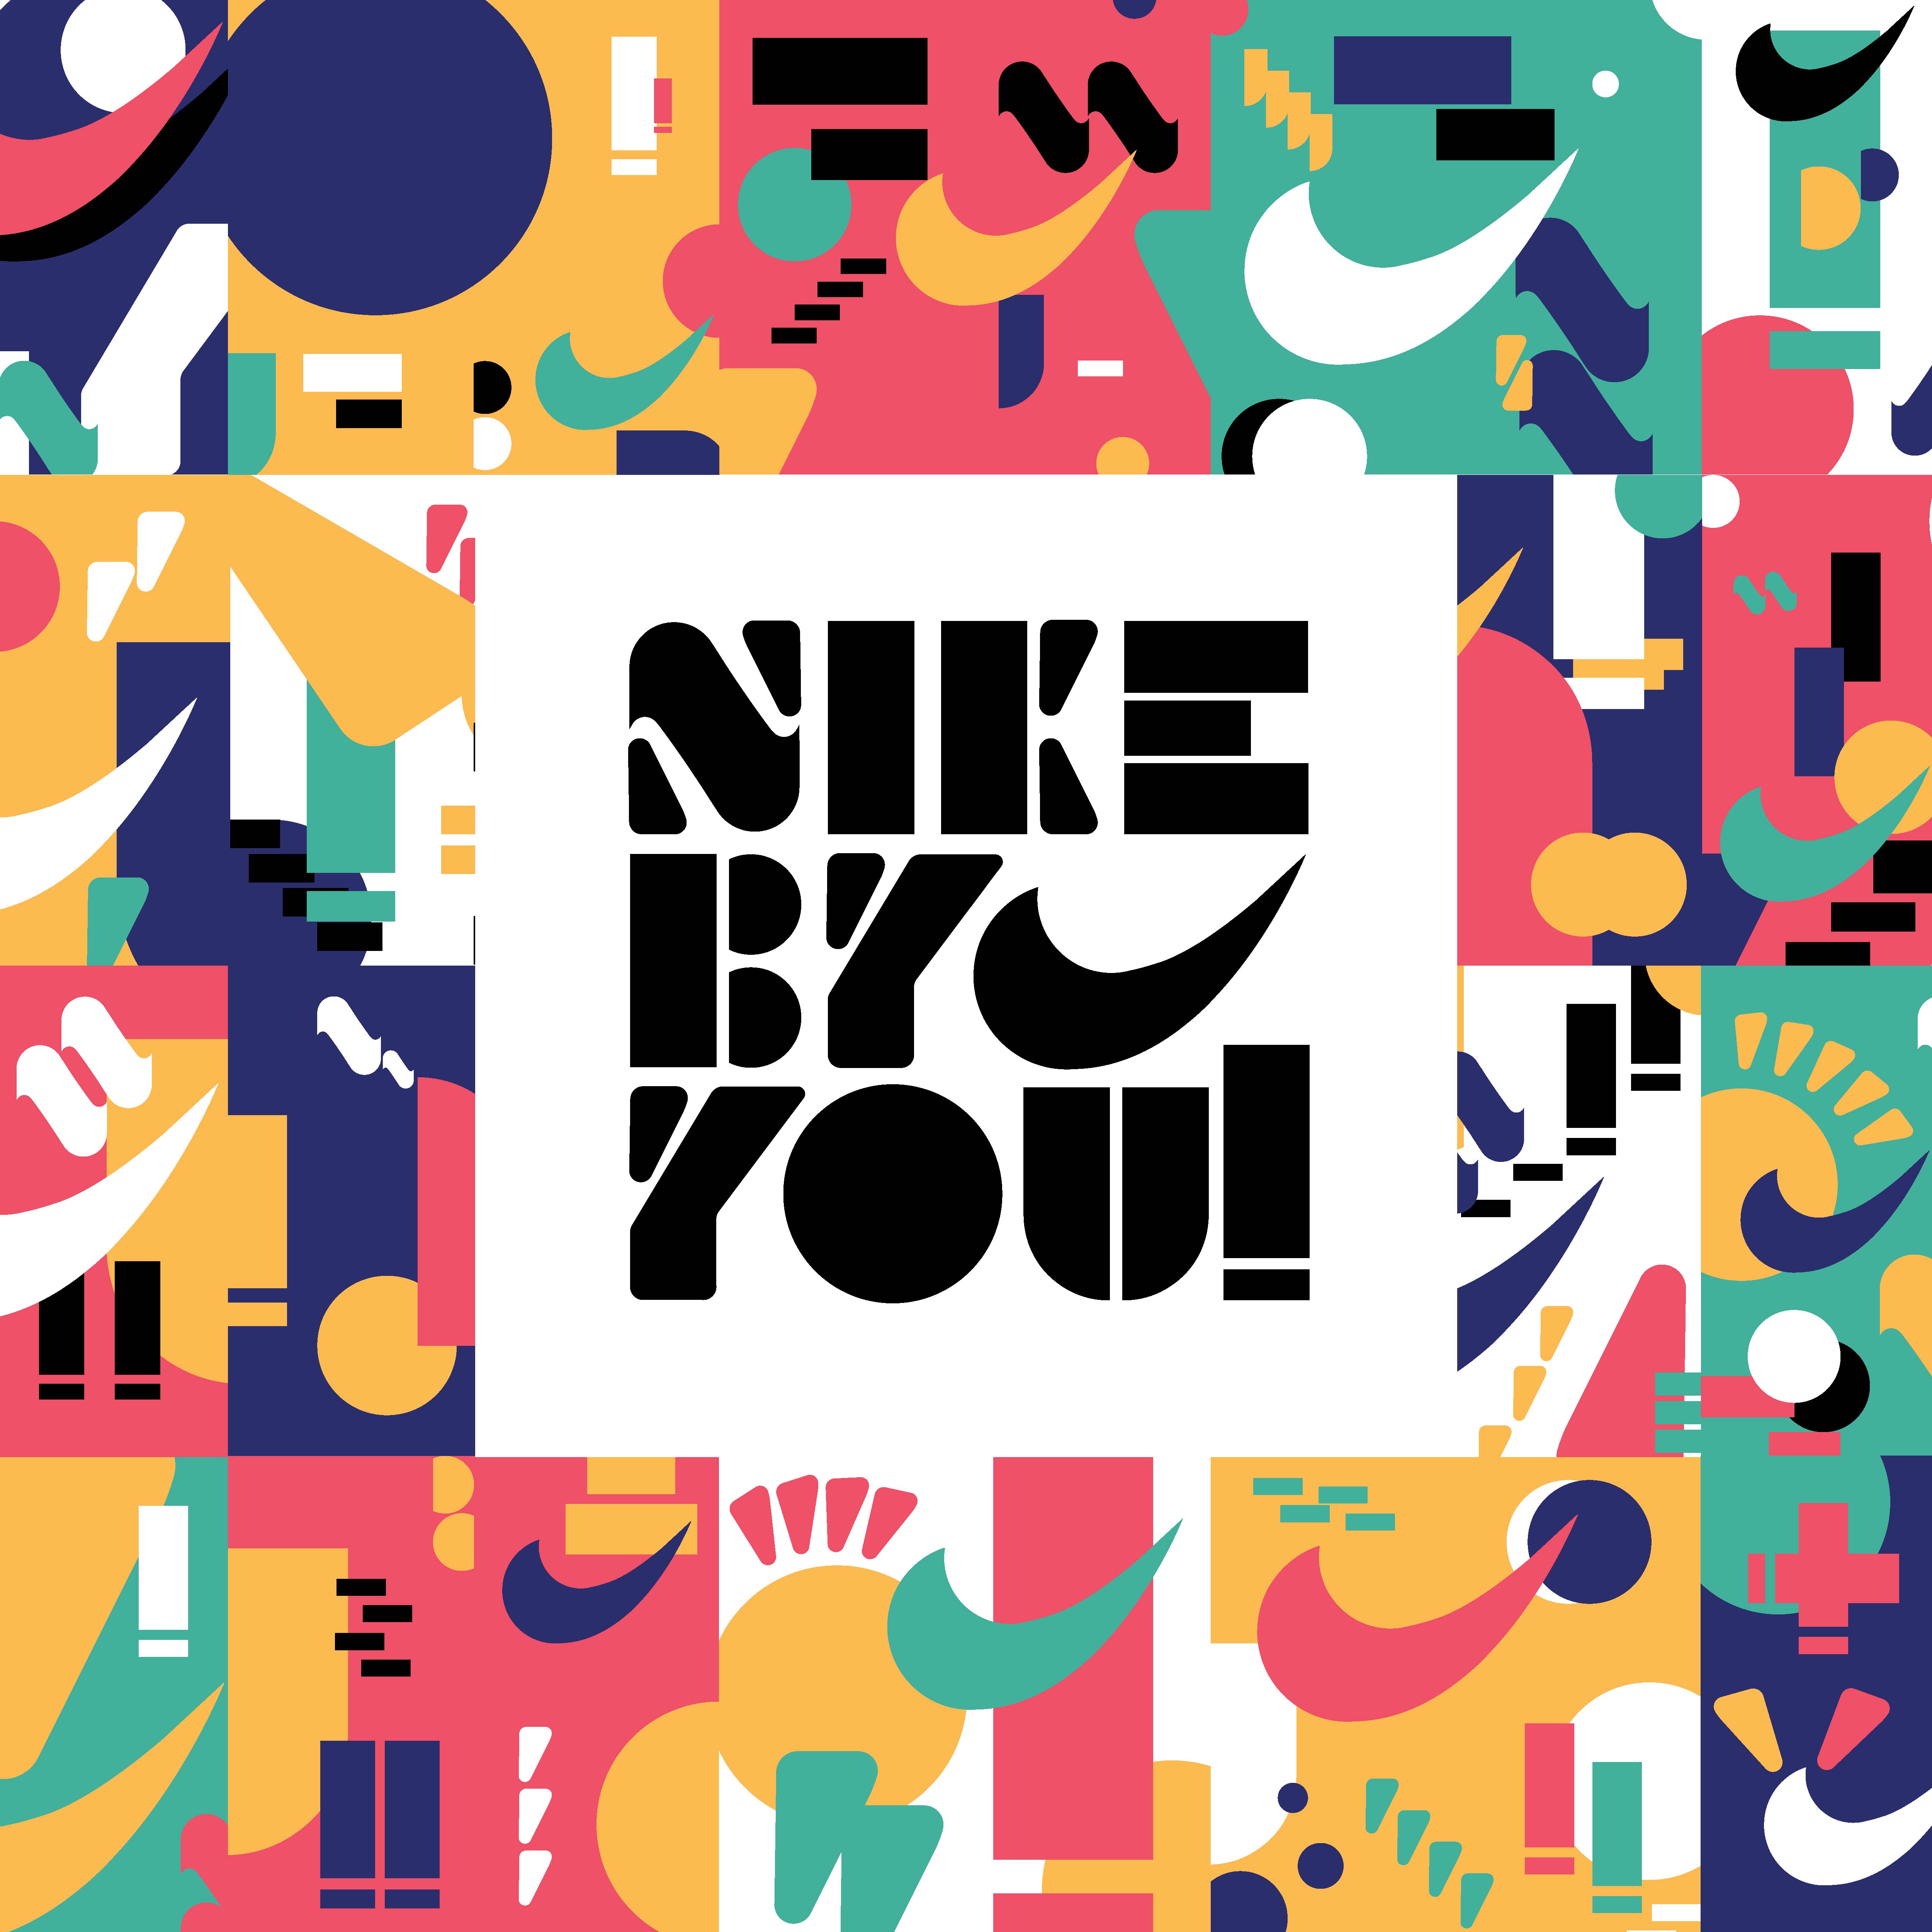 Student Identity Concept Project Called Nike by You! by Abdelrahman Adel